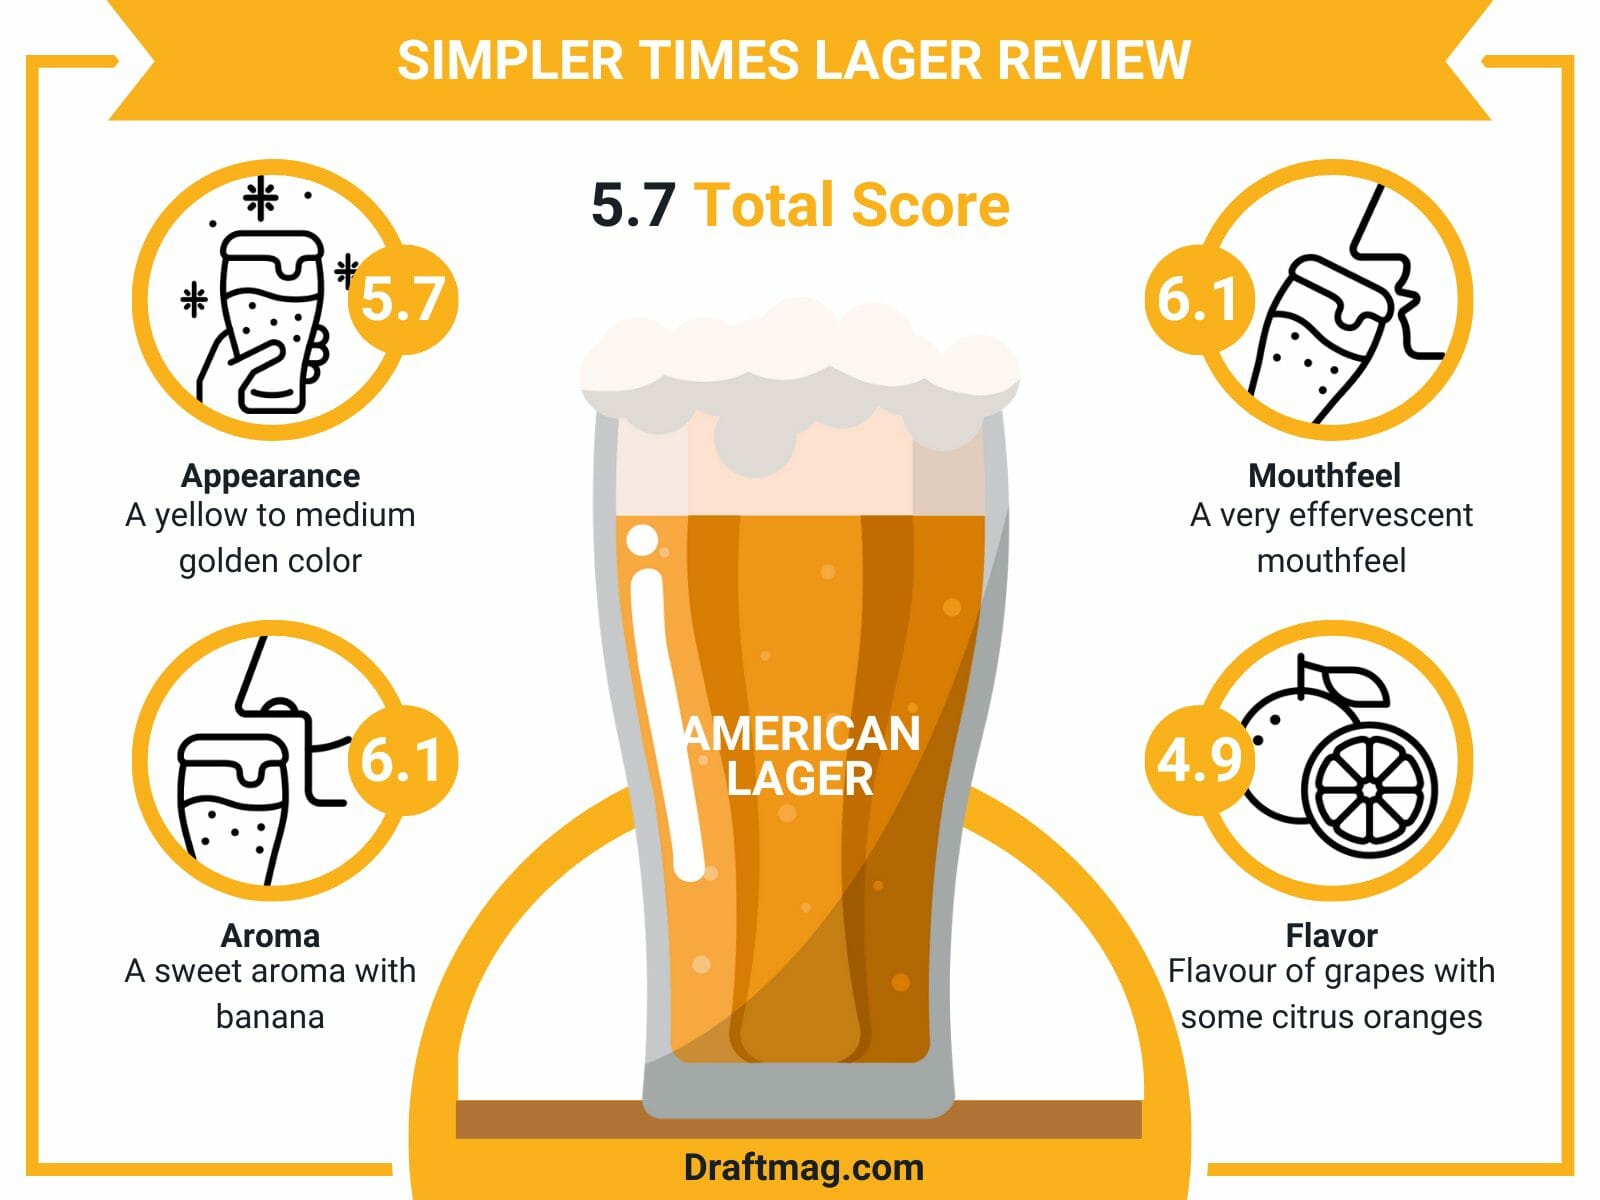 Simpler times lager review infographic